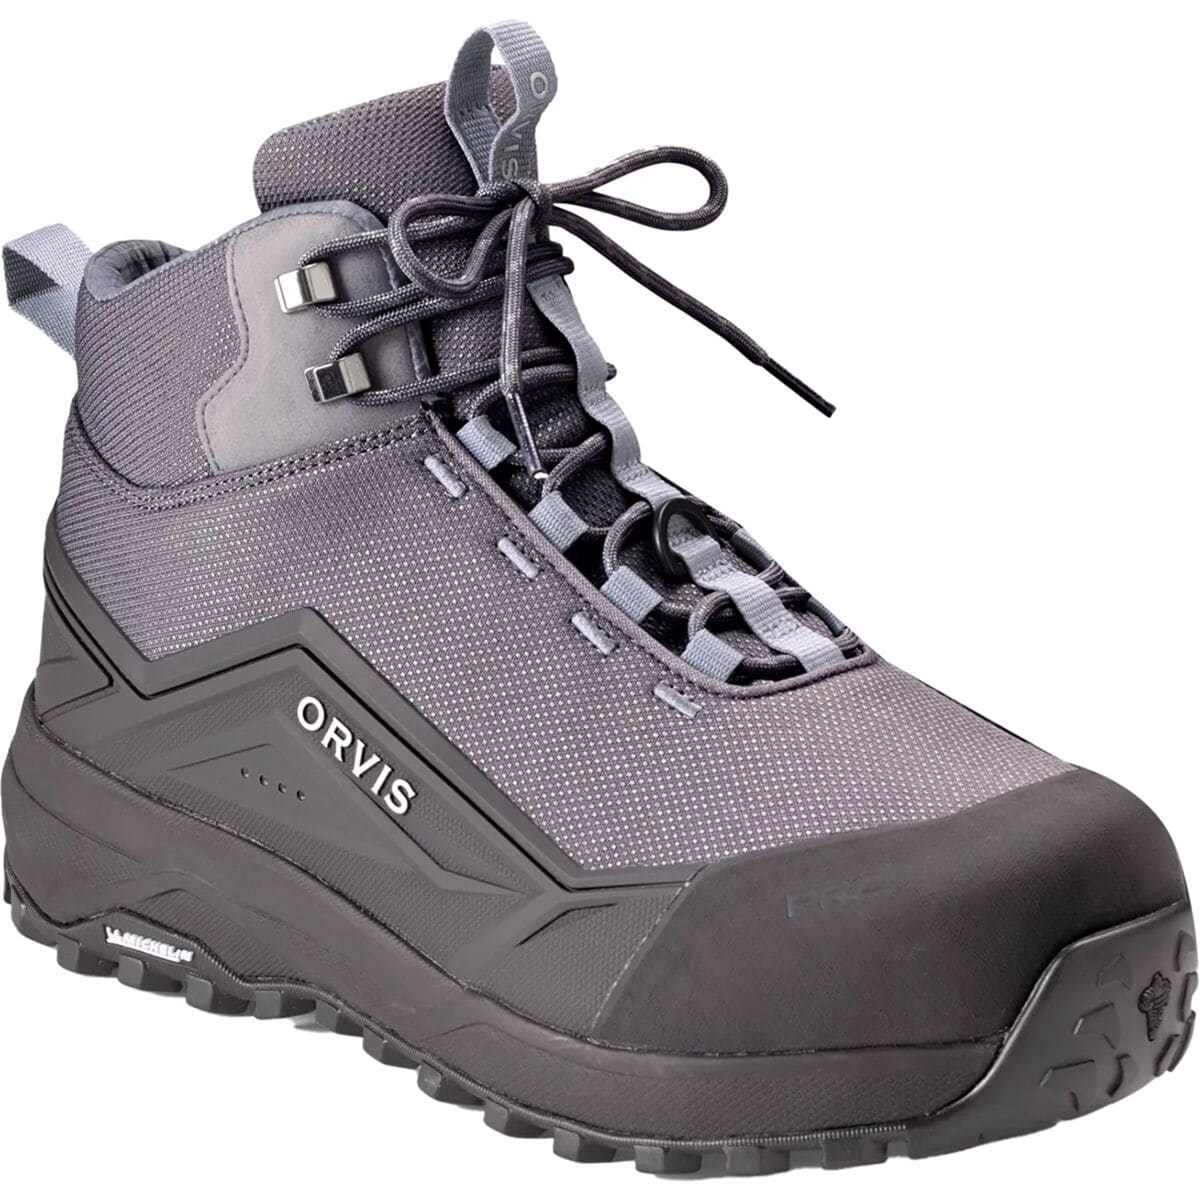 Orvis Pro LT Rubber Wading Boot - Fishing